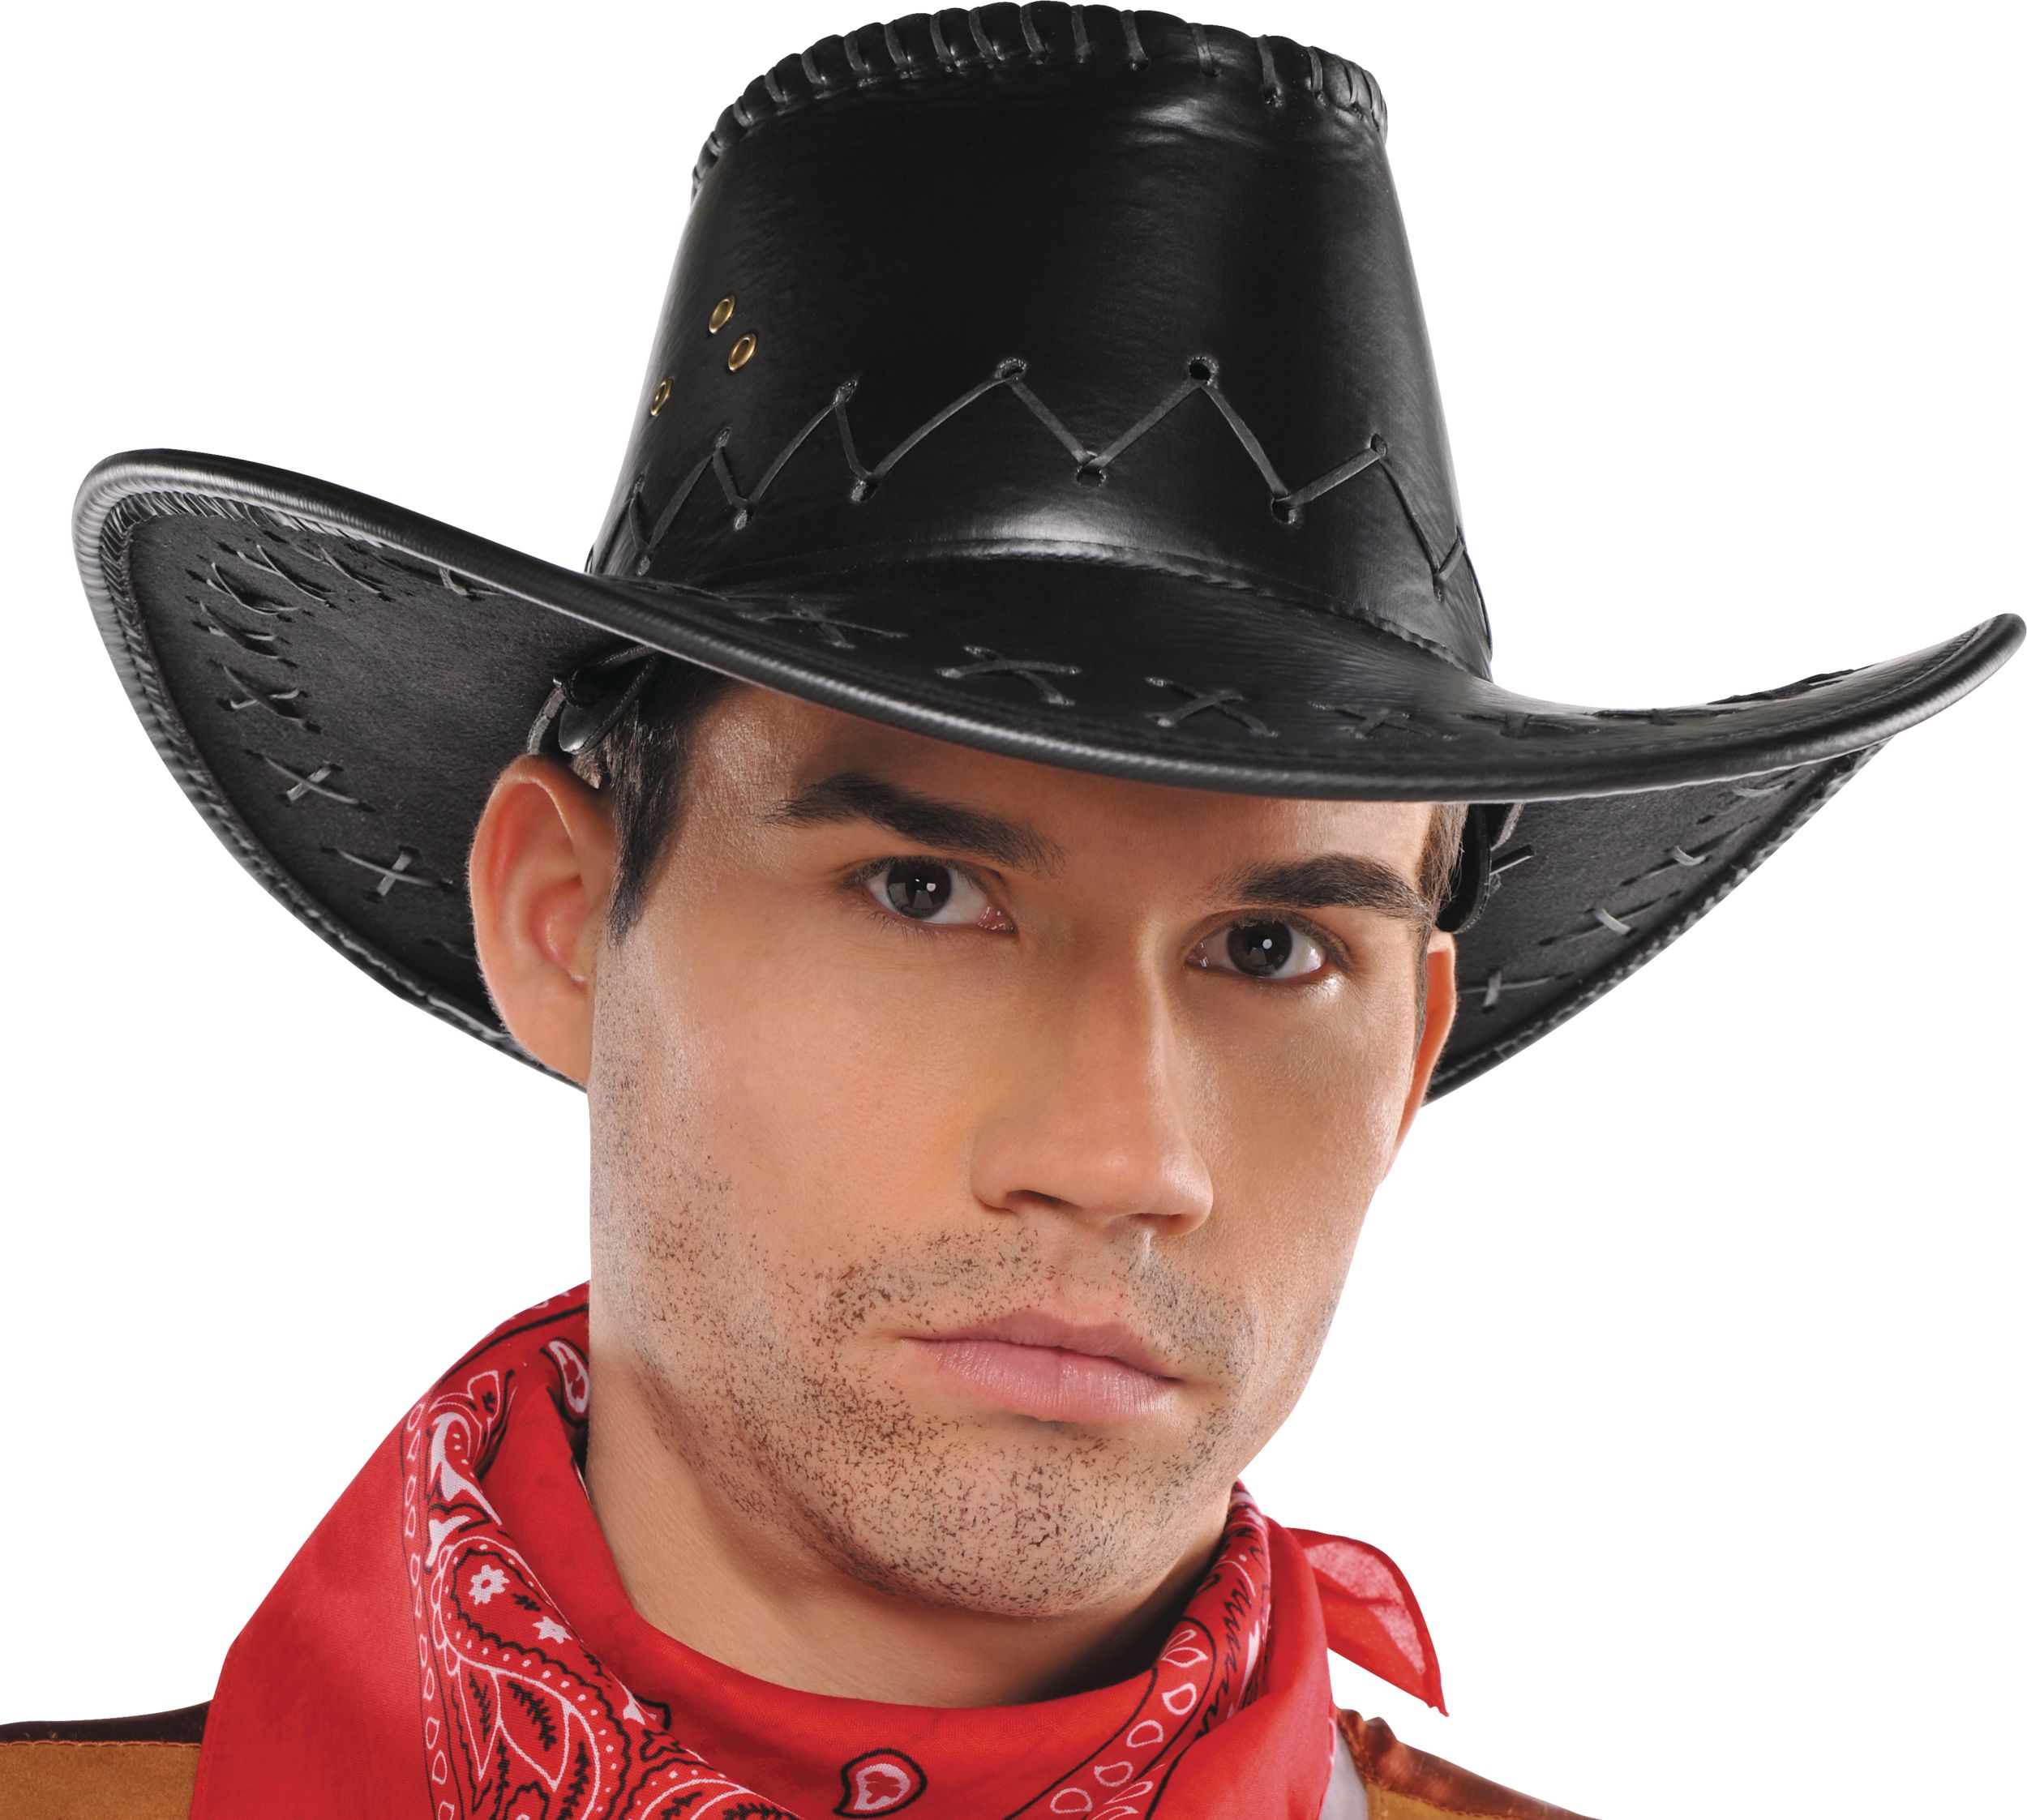 Western Cowboy Hat with Cross Stitches, Black, One Size, Wearable